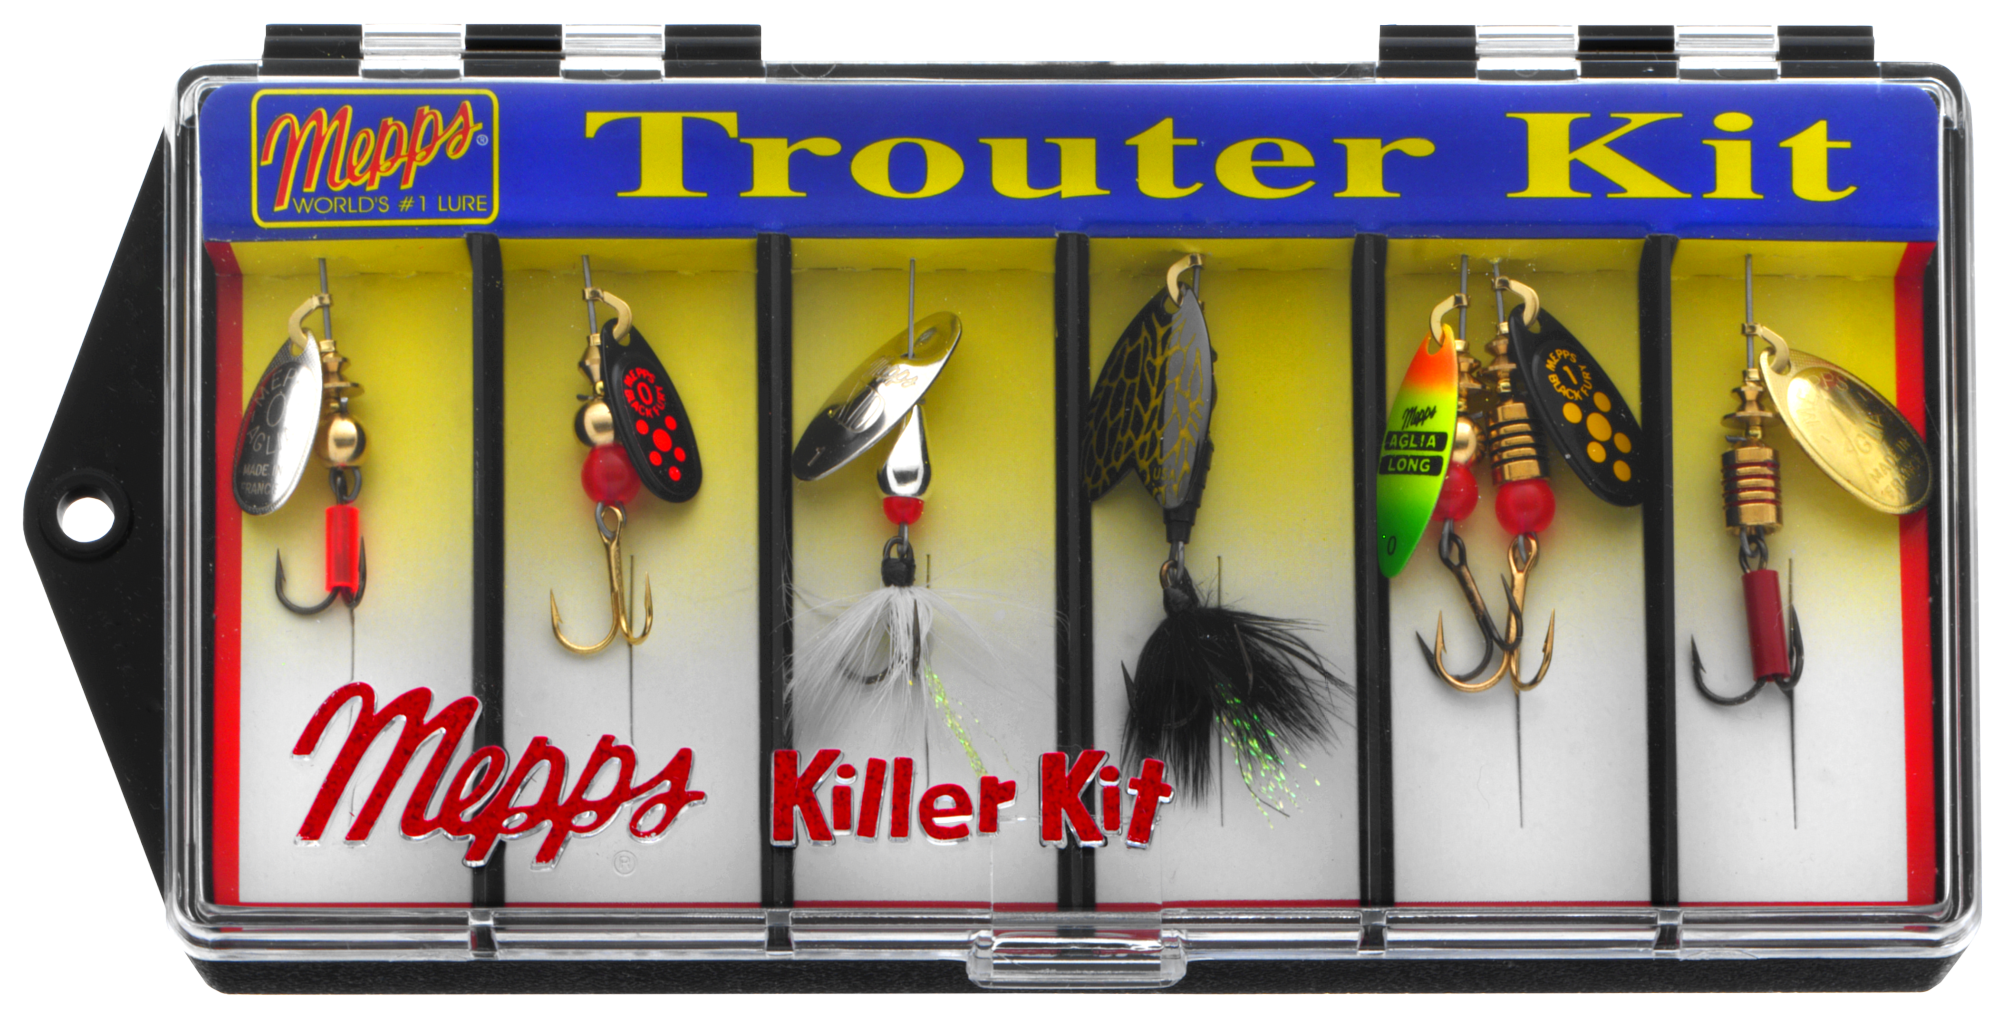 Mepps Trouter Kit - Hot Aglia Assortment, Spinners & Spinnerbaits